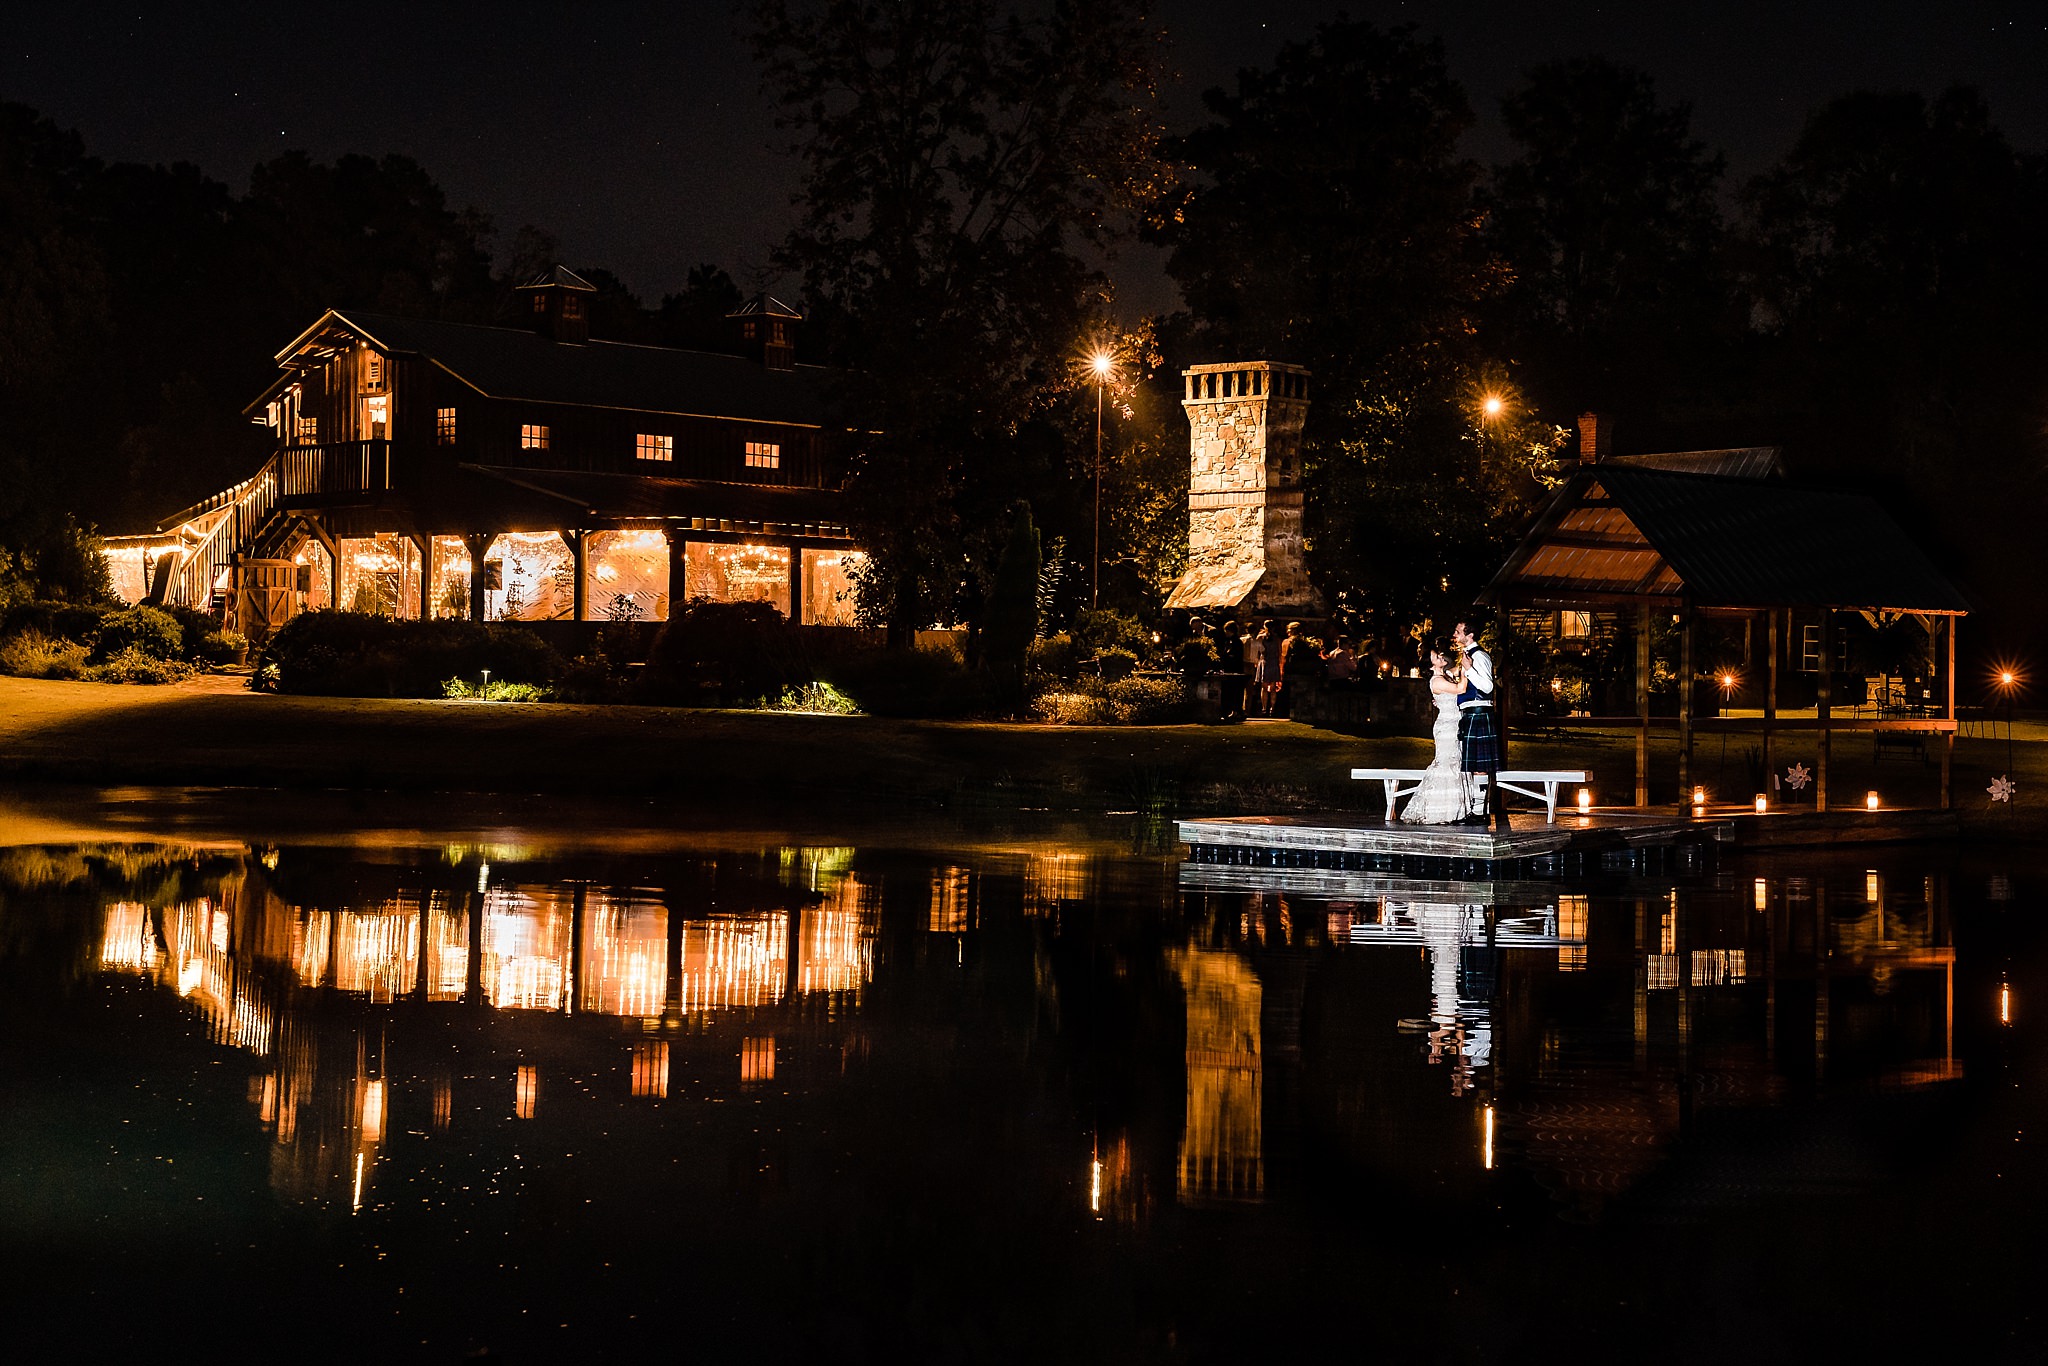 Chapel Hill Carriage House Wedding